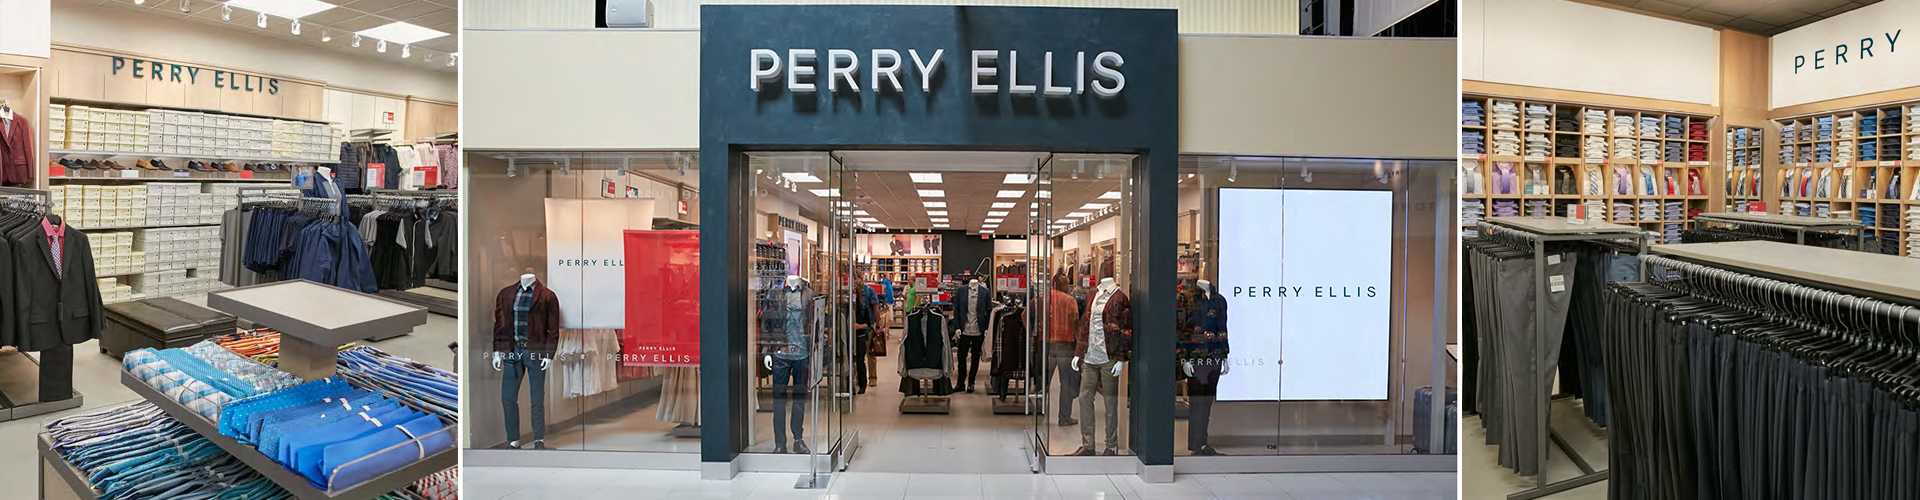 Perry Ellis Outlet Store